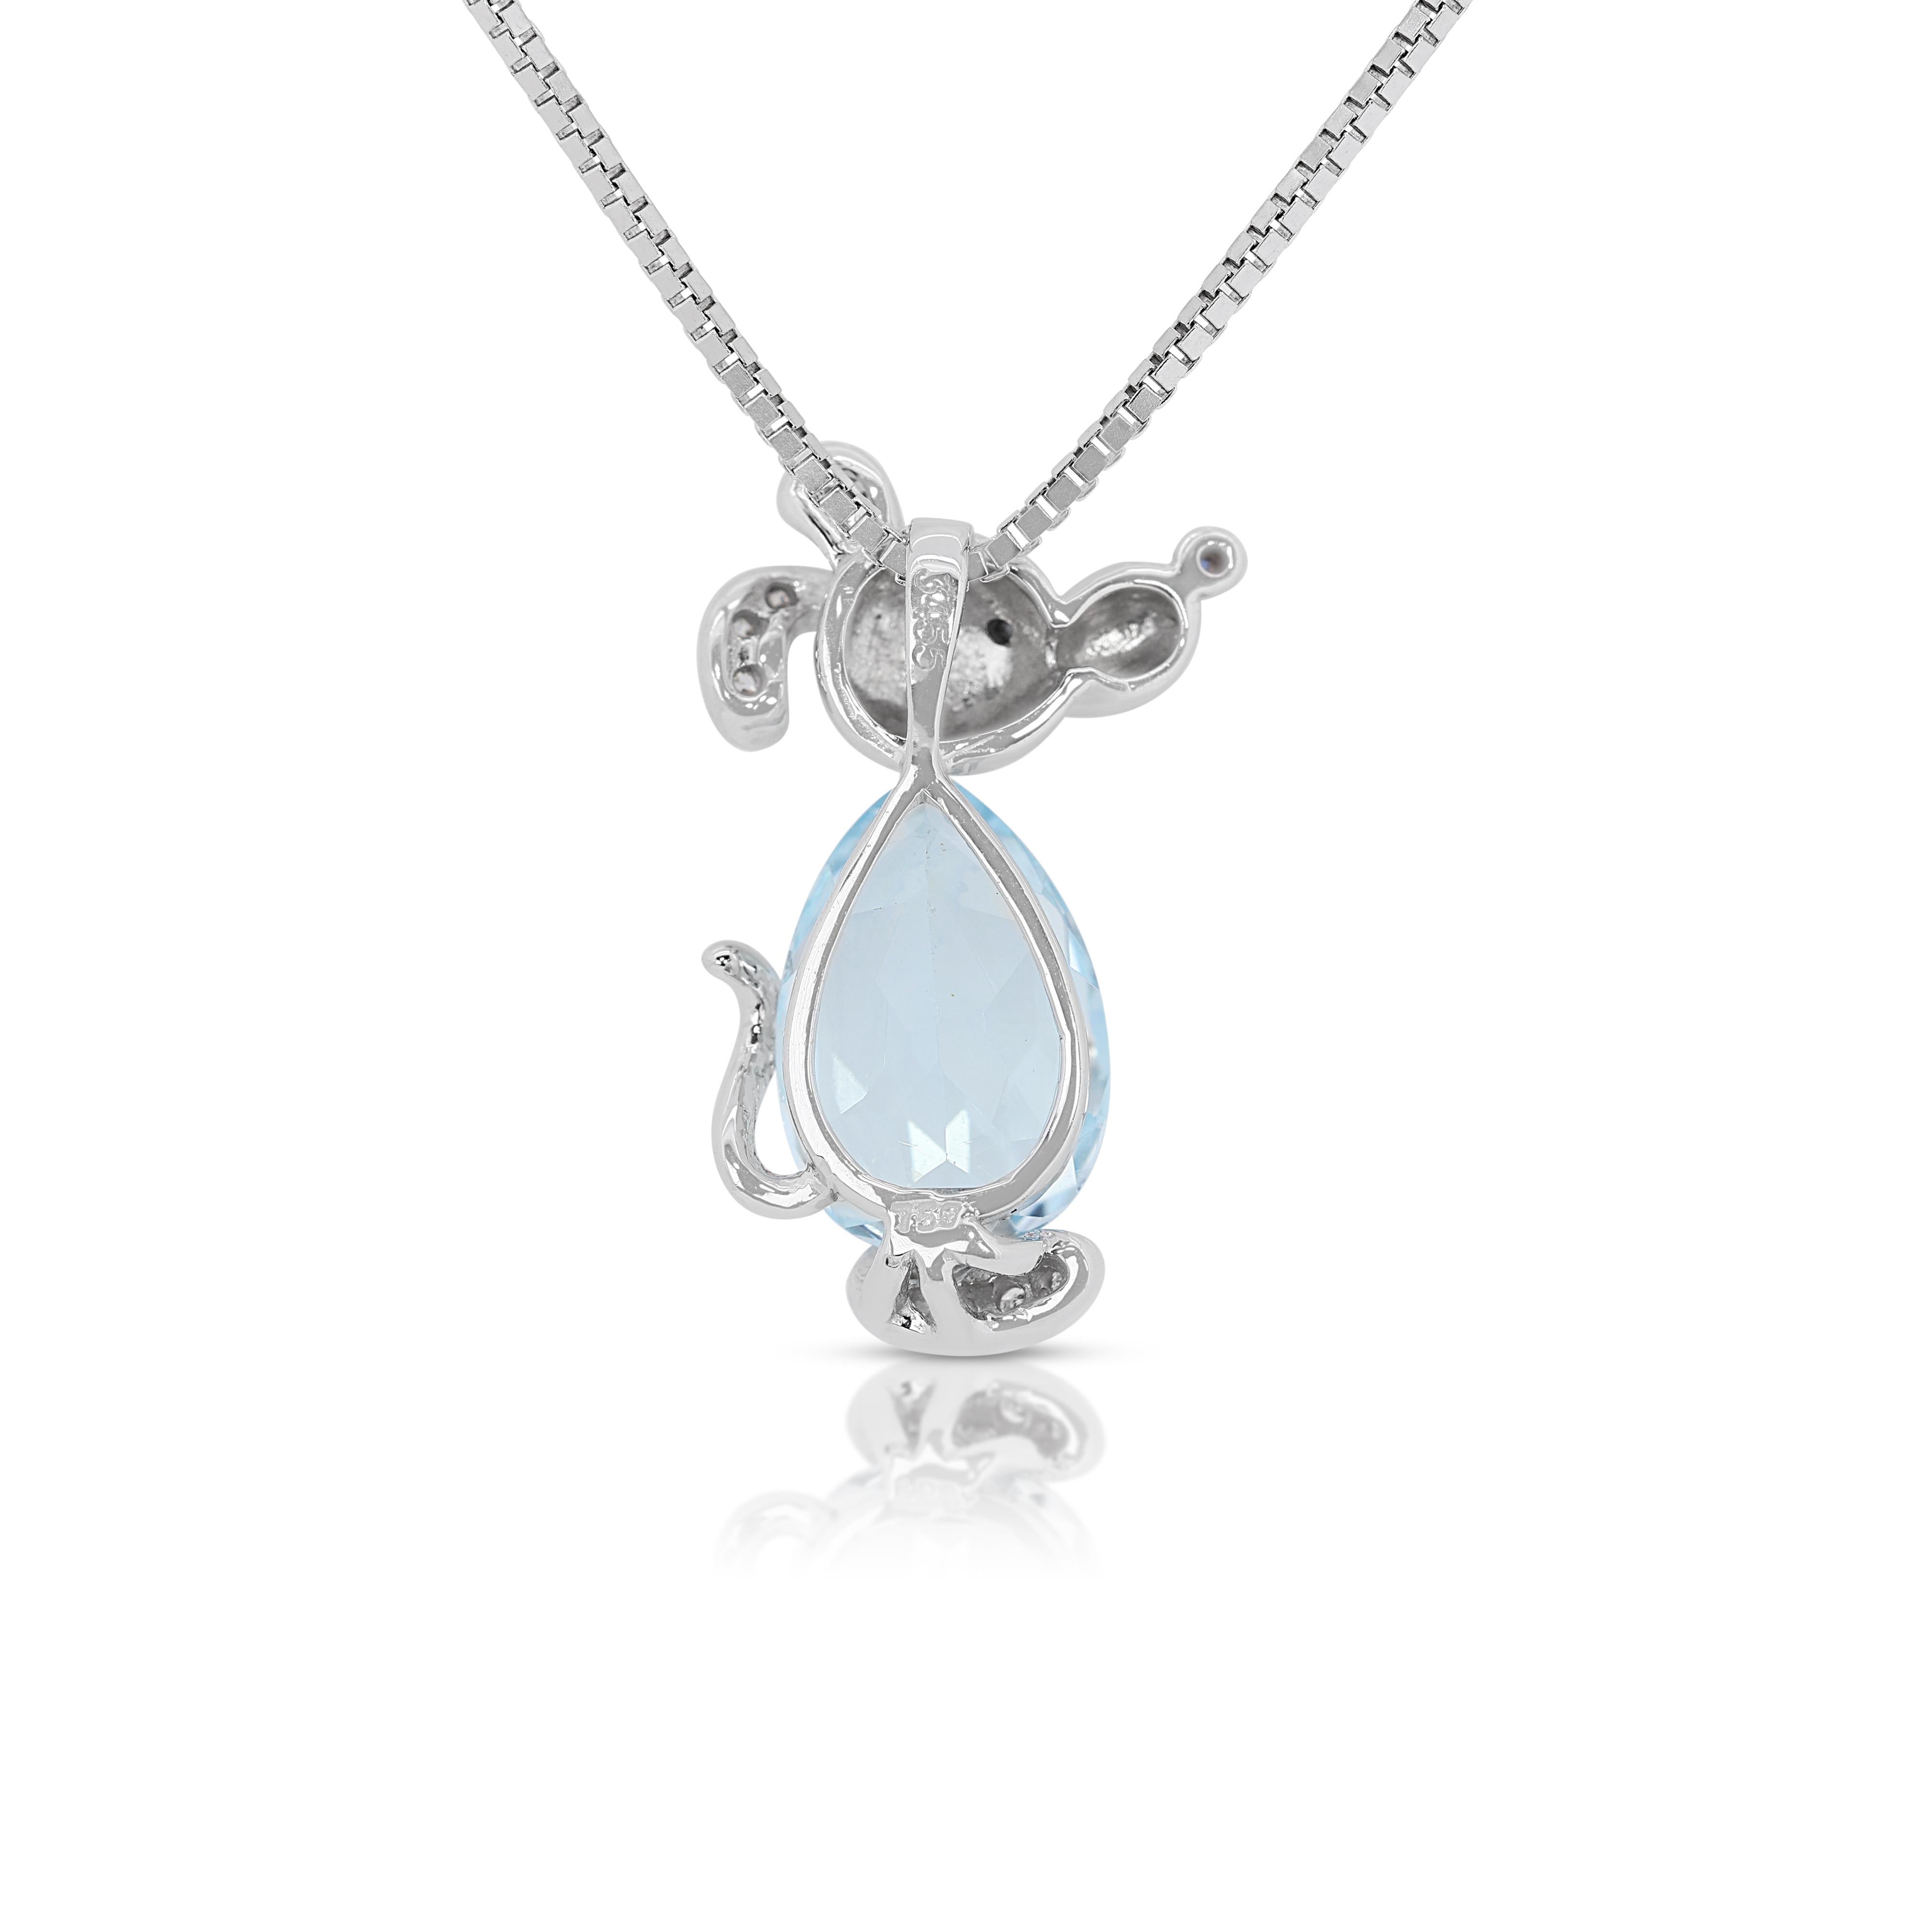 Women's Shining 1.45ct Topaz Pendant w/ Sapphires & Diamonds - (Chain not Included) For Sale